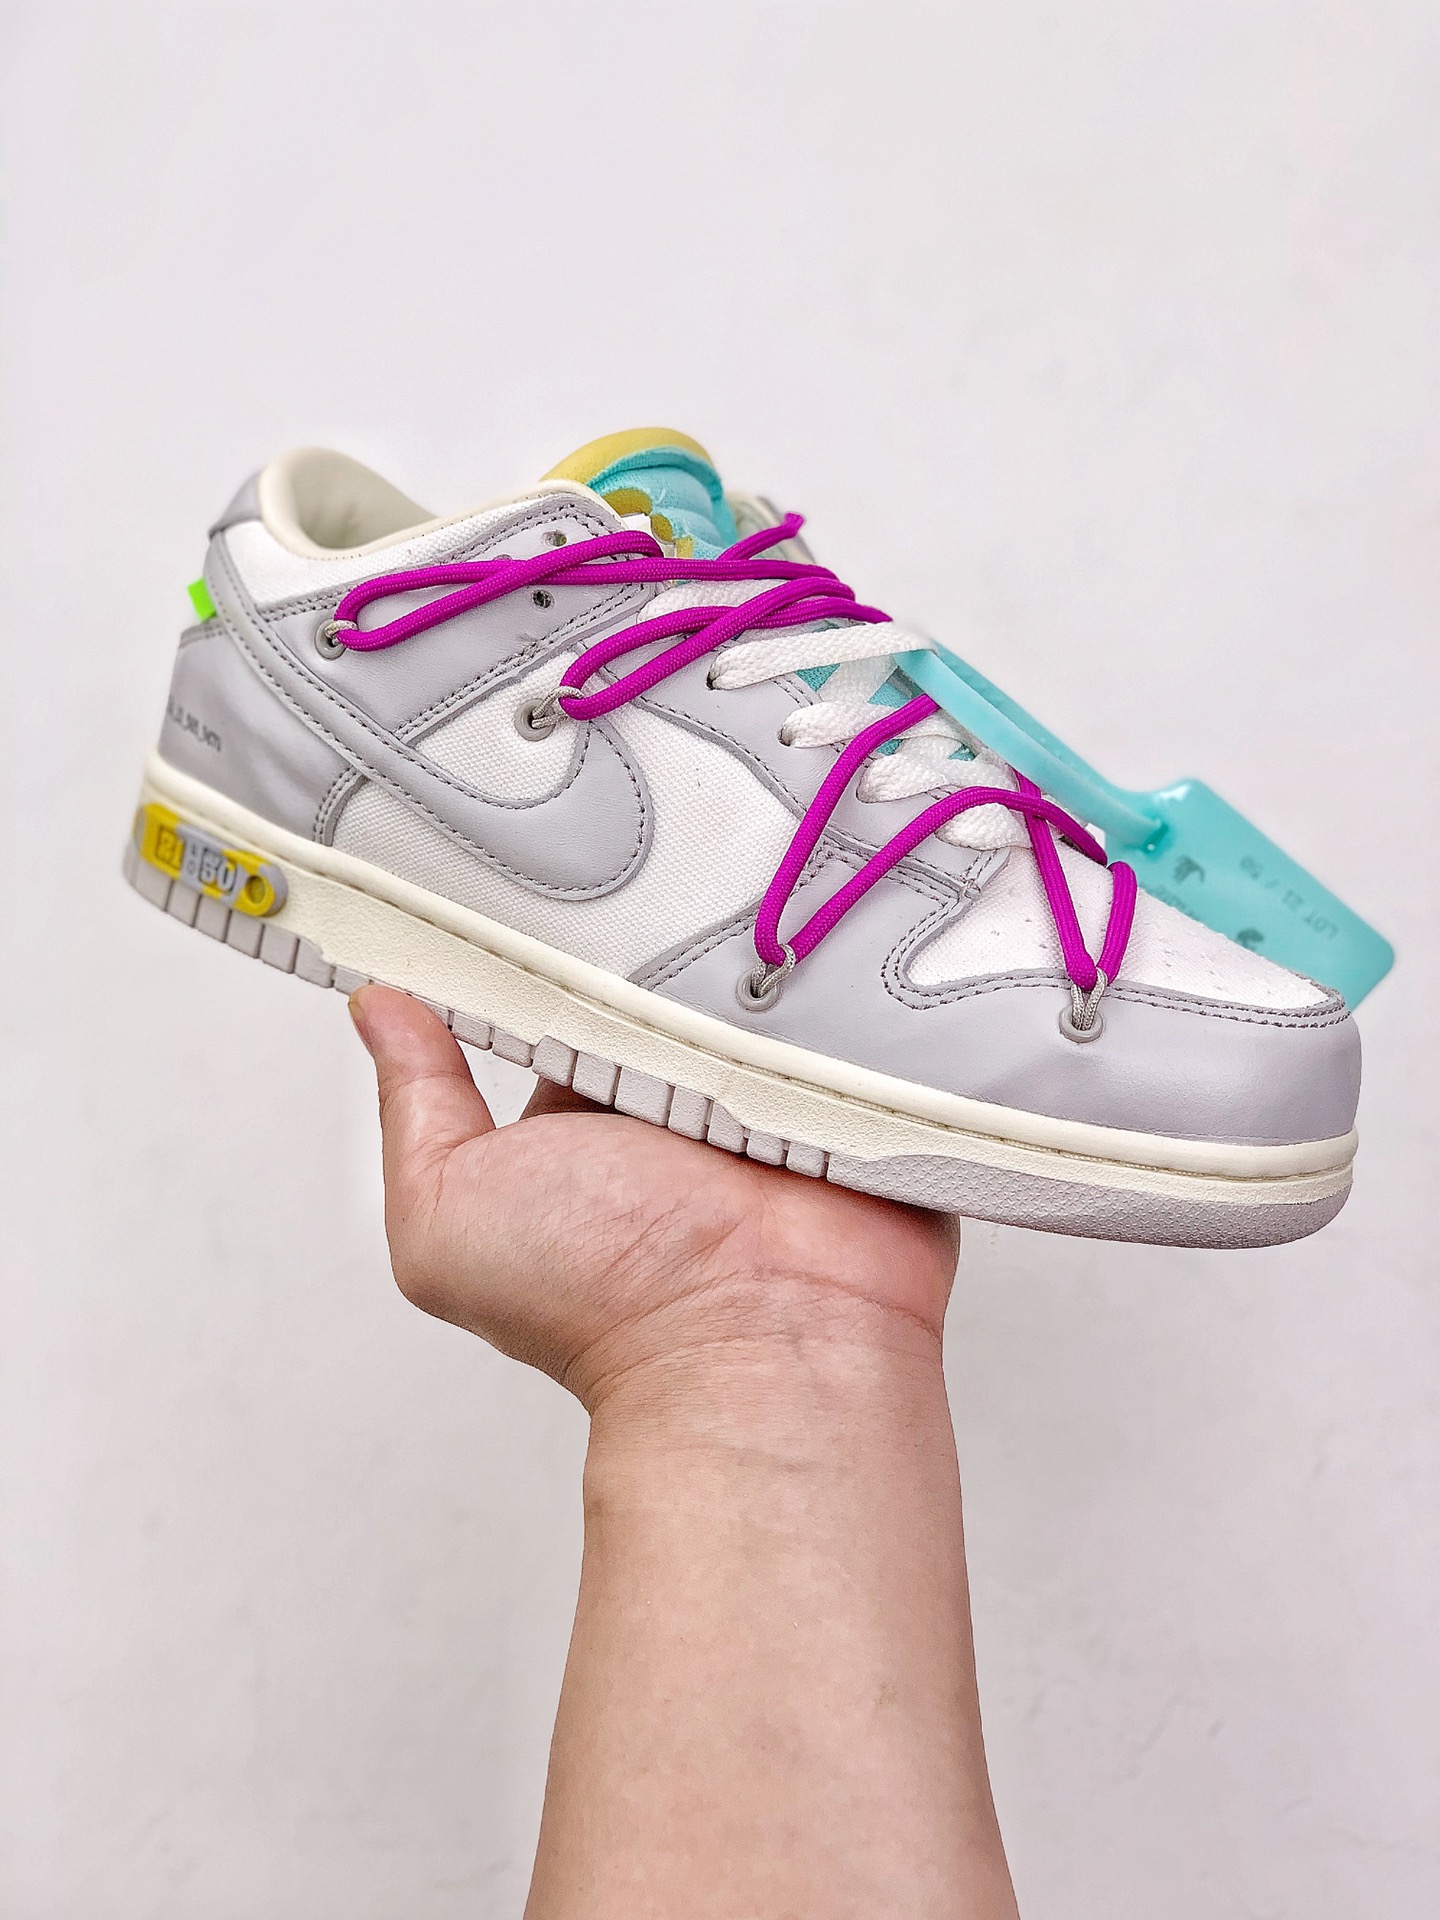 27cm Nike x Off White dunk low Lot 21